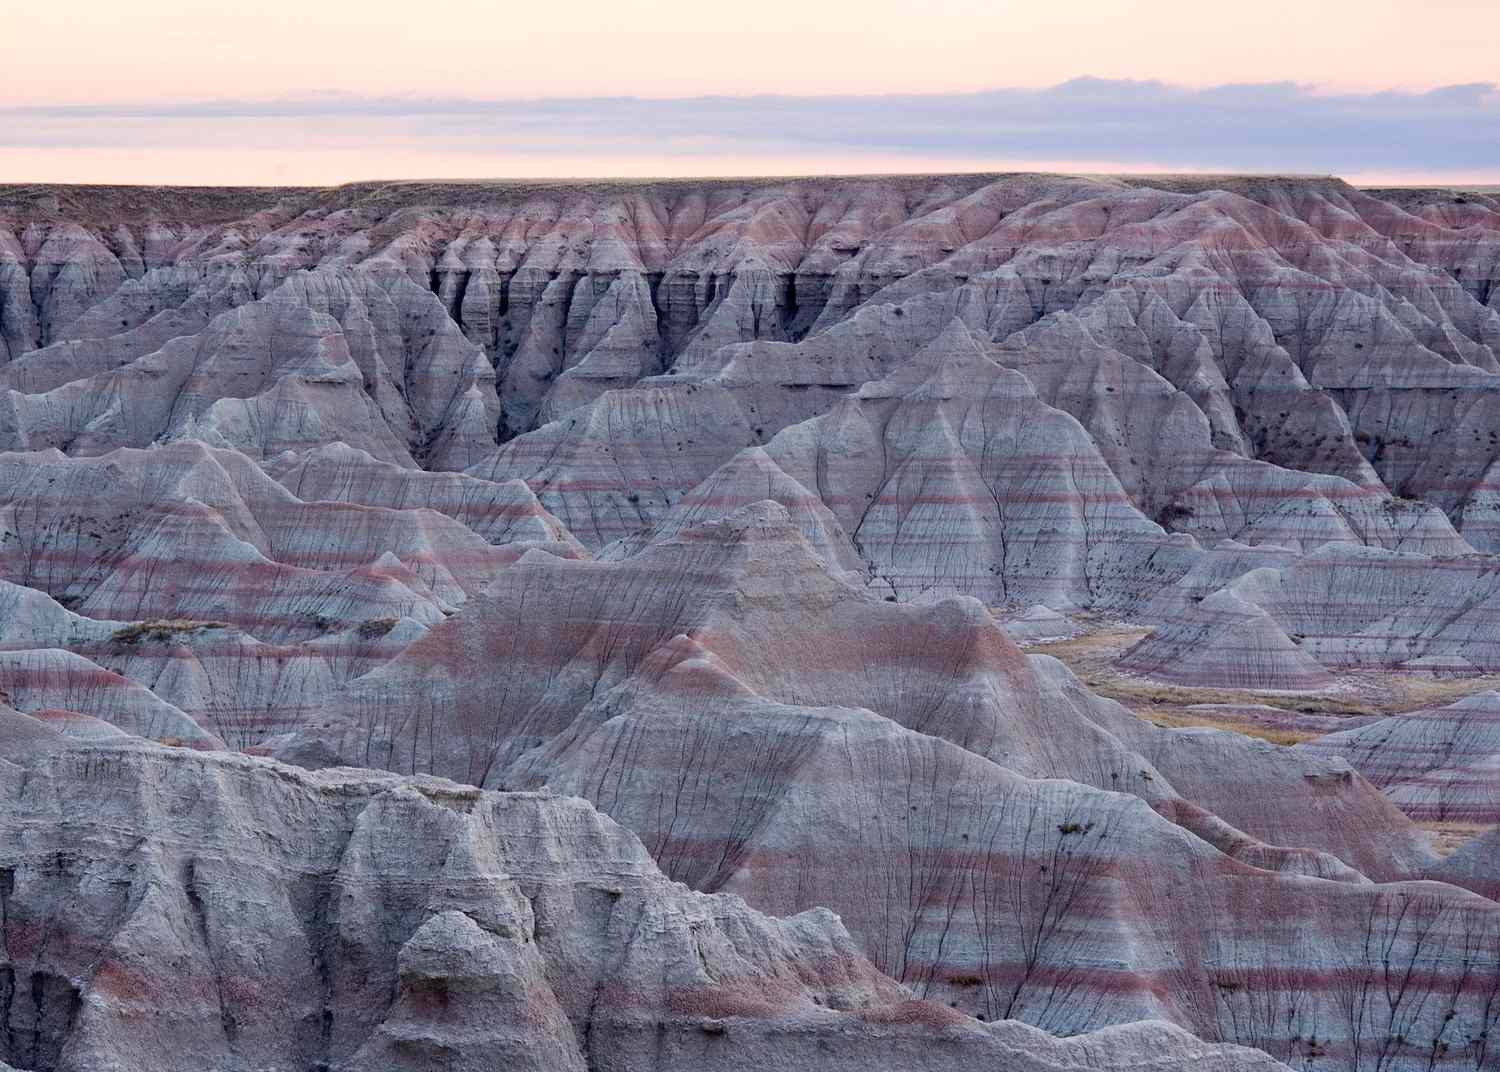 View of Badlands canyons in South Dakota